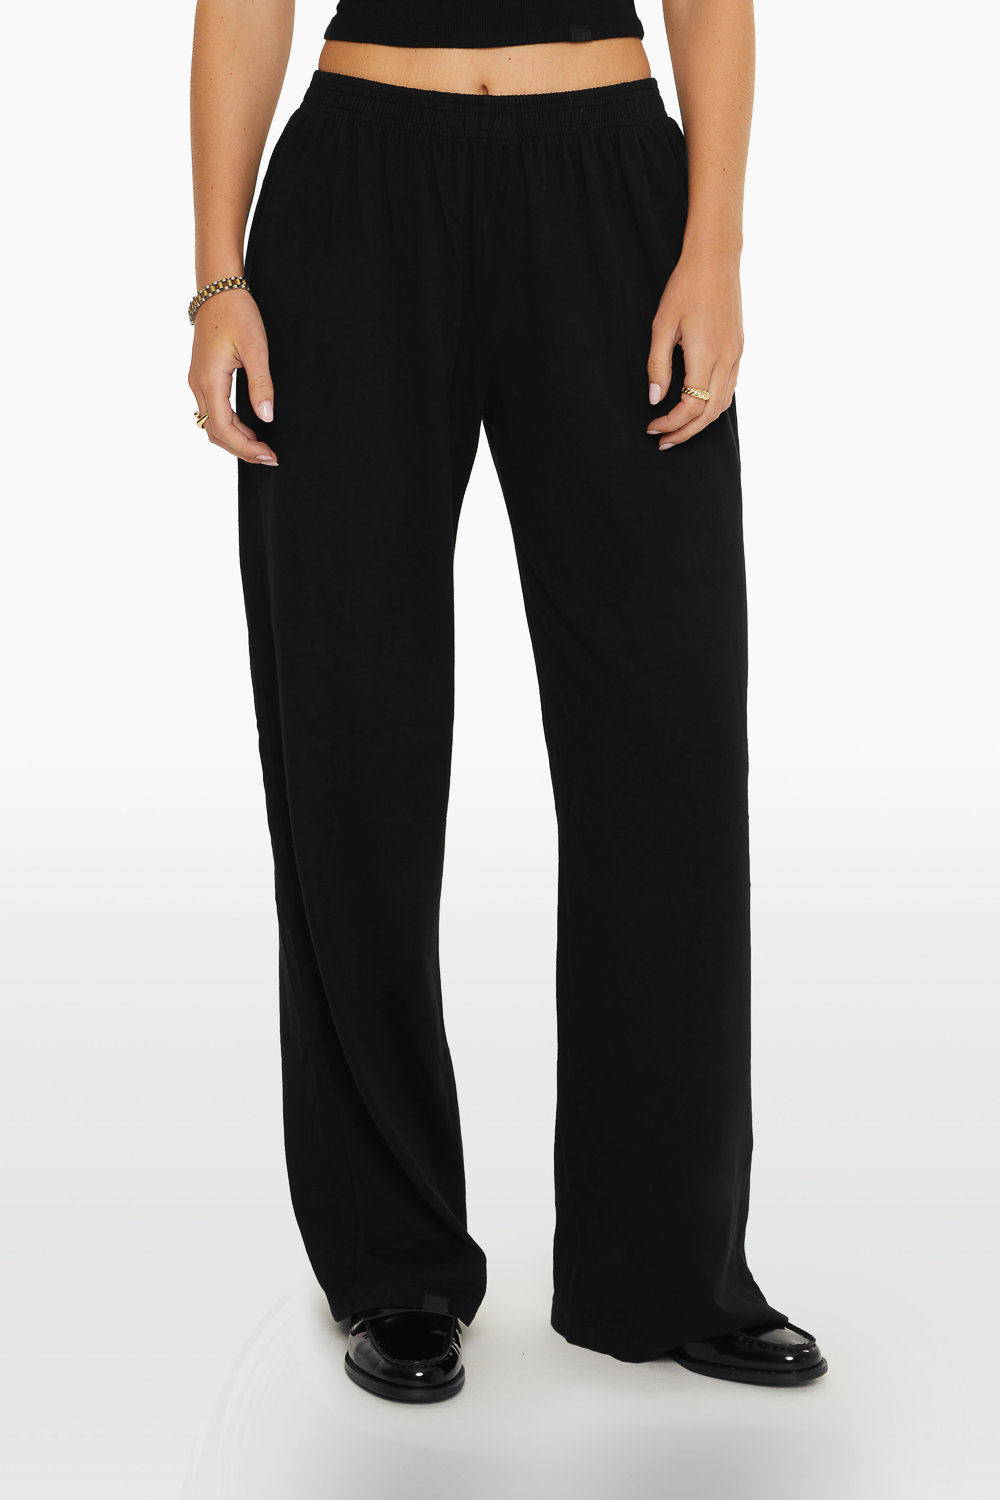 HEAVY COTTON EASY PANTS - ONYX Featured Image